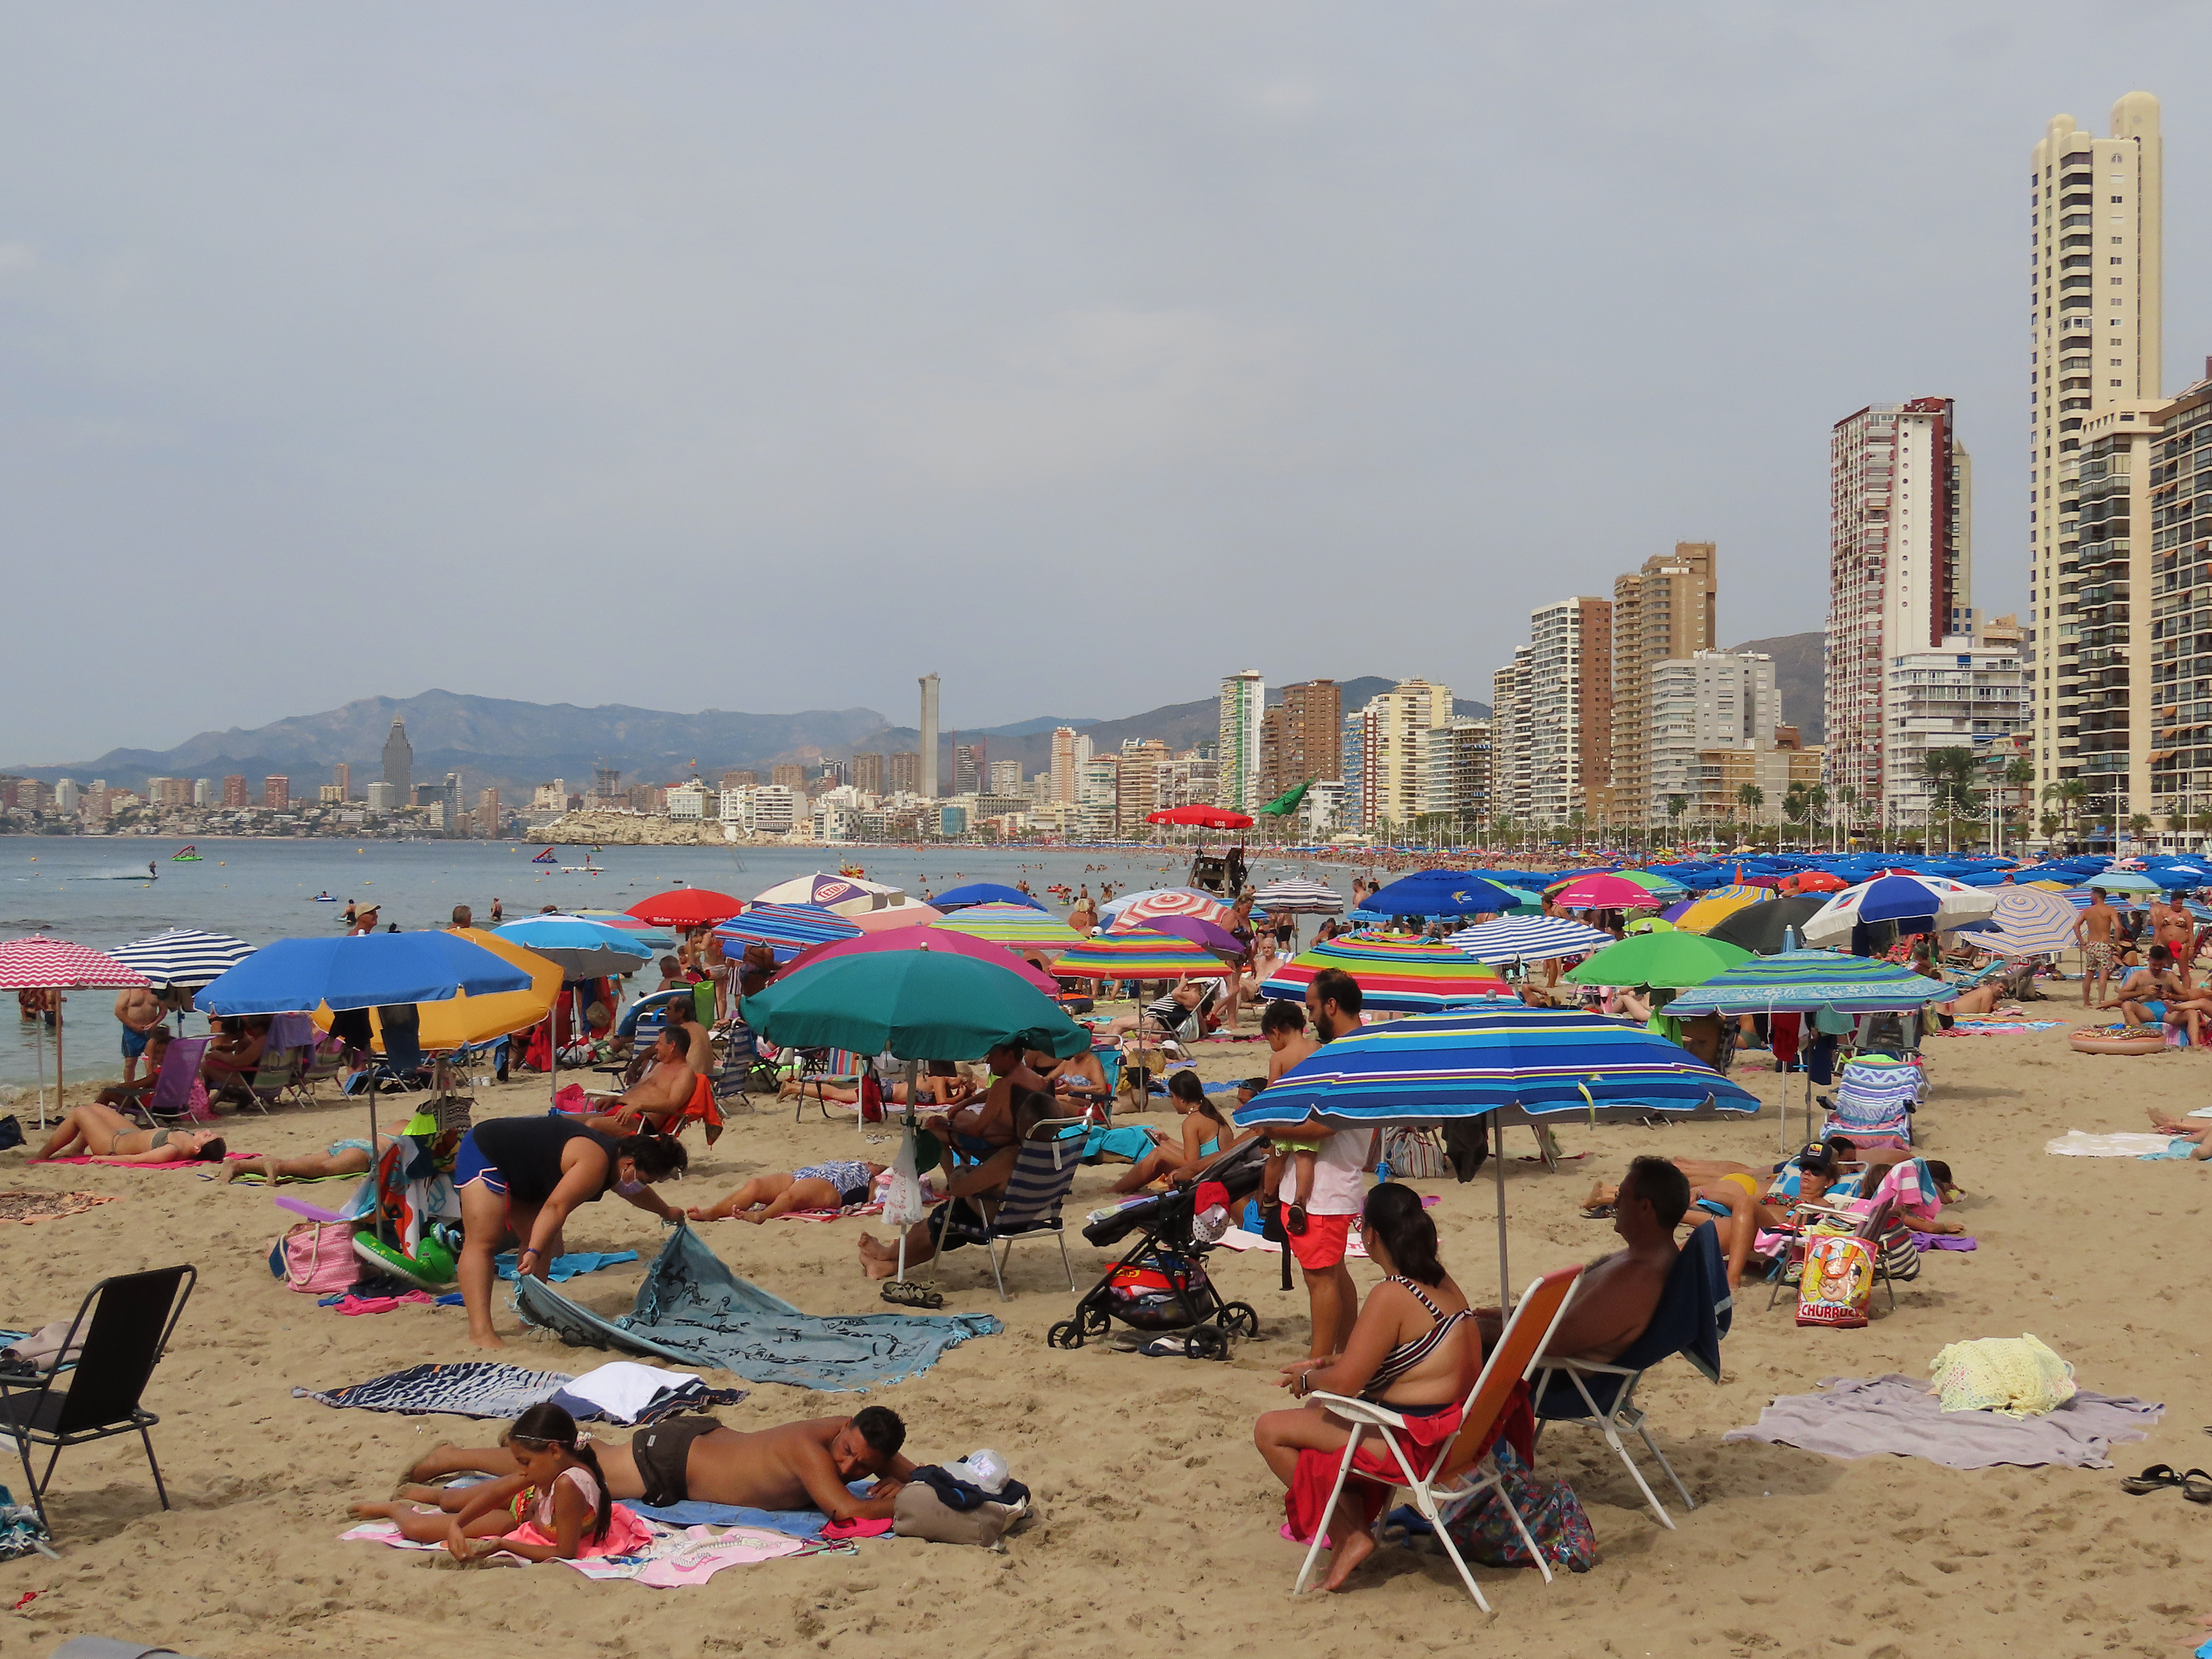 A popular holiday destination in Spain has introduced a new rule at its beaches